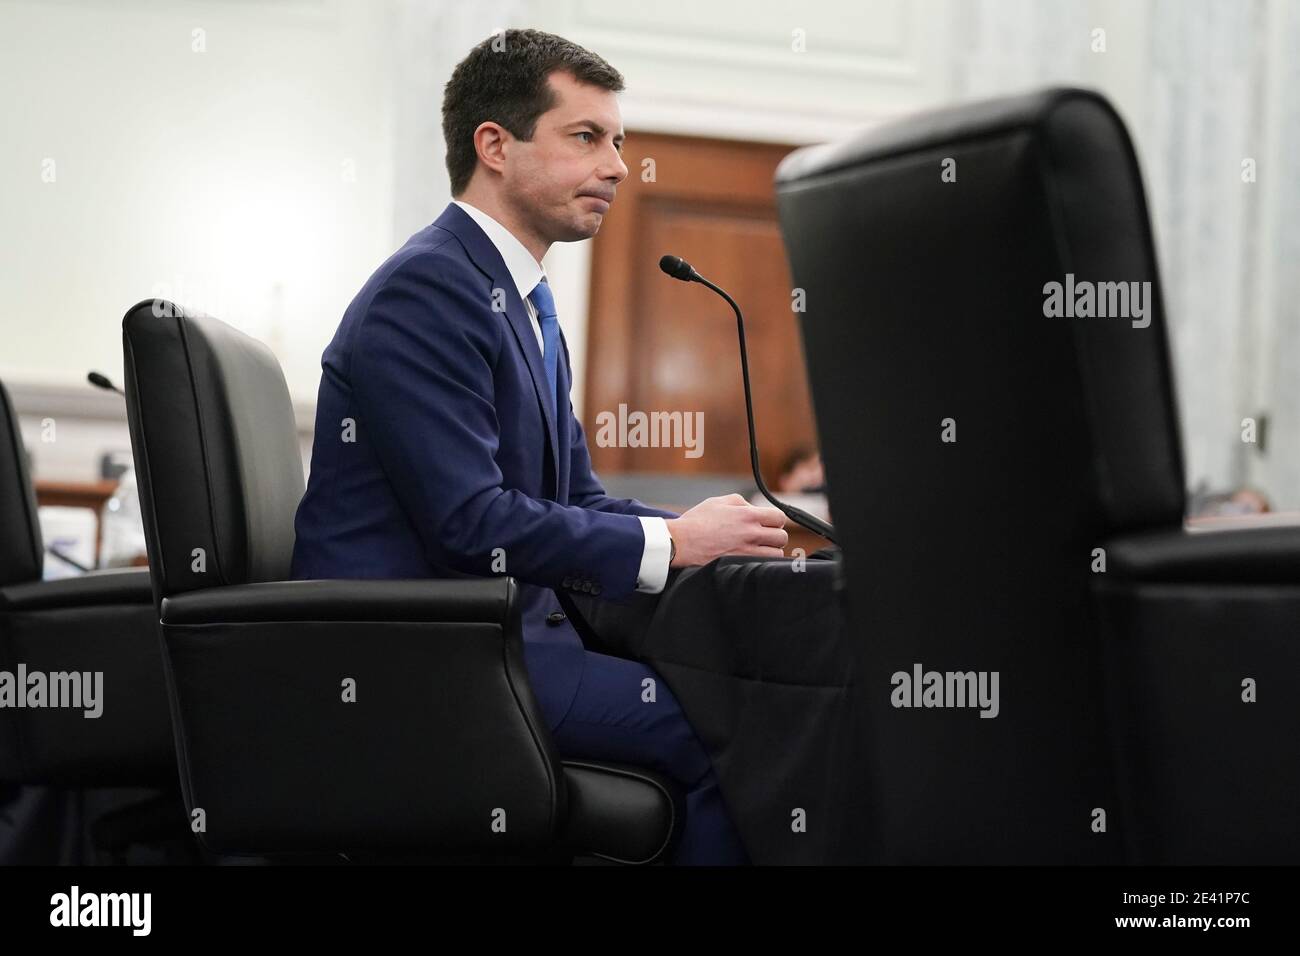 Washington, DC, USA. 21st Jan, 2021. Pete Buttigieg, U.S. secretary of transportation nominee for U.S. President Joe Biden, listens during a Senate Commerce, Science and Transportation Committee confirmation hearing in Washington, DC, U.S., on Thursday, Jan. 21, 2021. Buttigieg, is pledging to carry out the administration's ambitious agenda to rebuild the nation's infrastructure, calling it a 'generational opportunity' to create new jobs, fight economic inequality and stem climate change. Credit: Stefani Reynolds/Pool via CNP | usage worldwide Credit: dpa/Alamy Live News Stock Photo